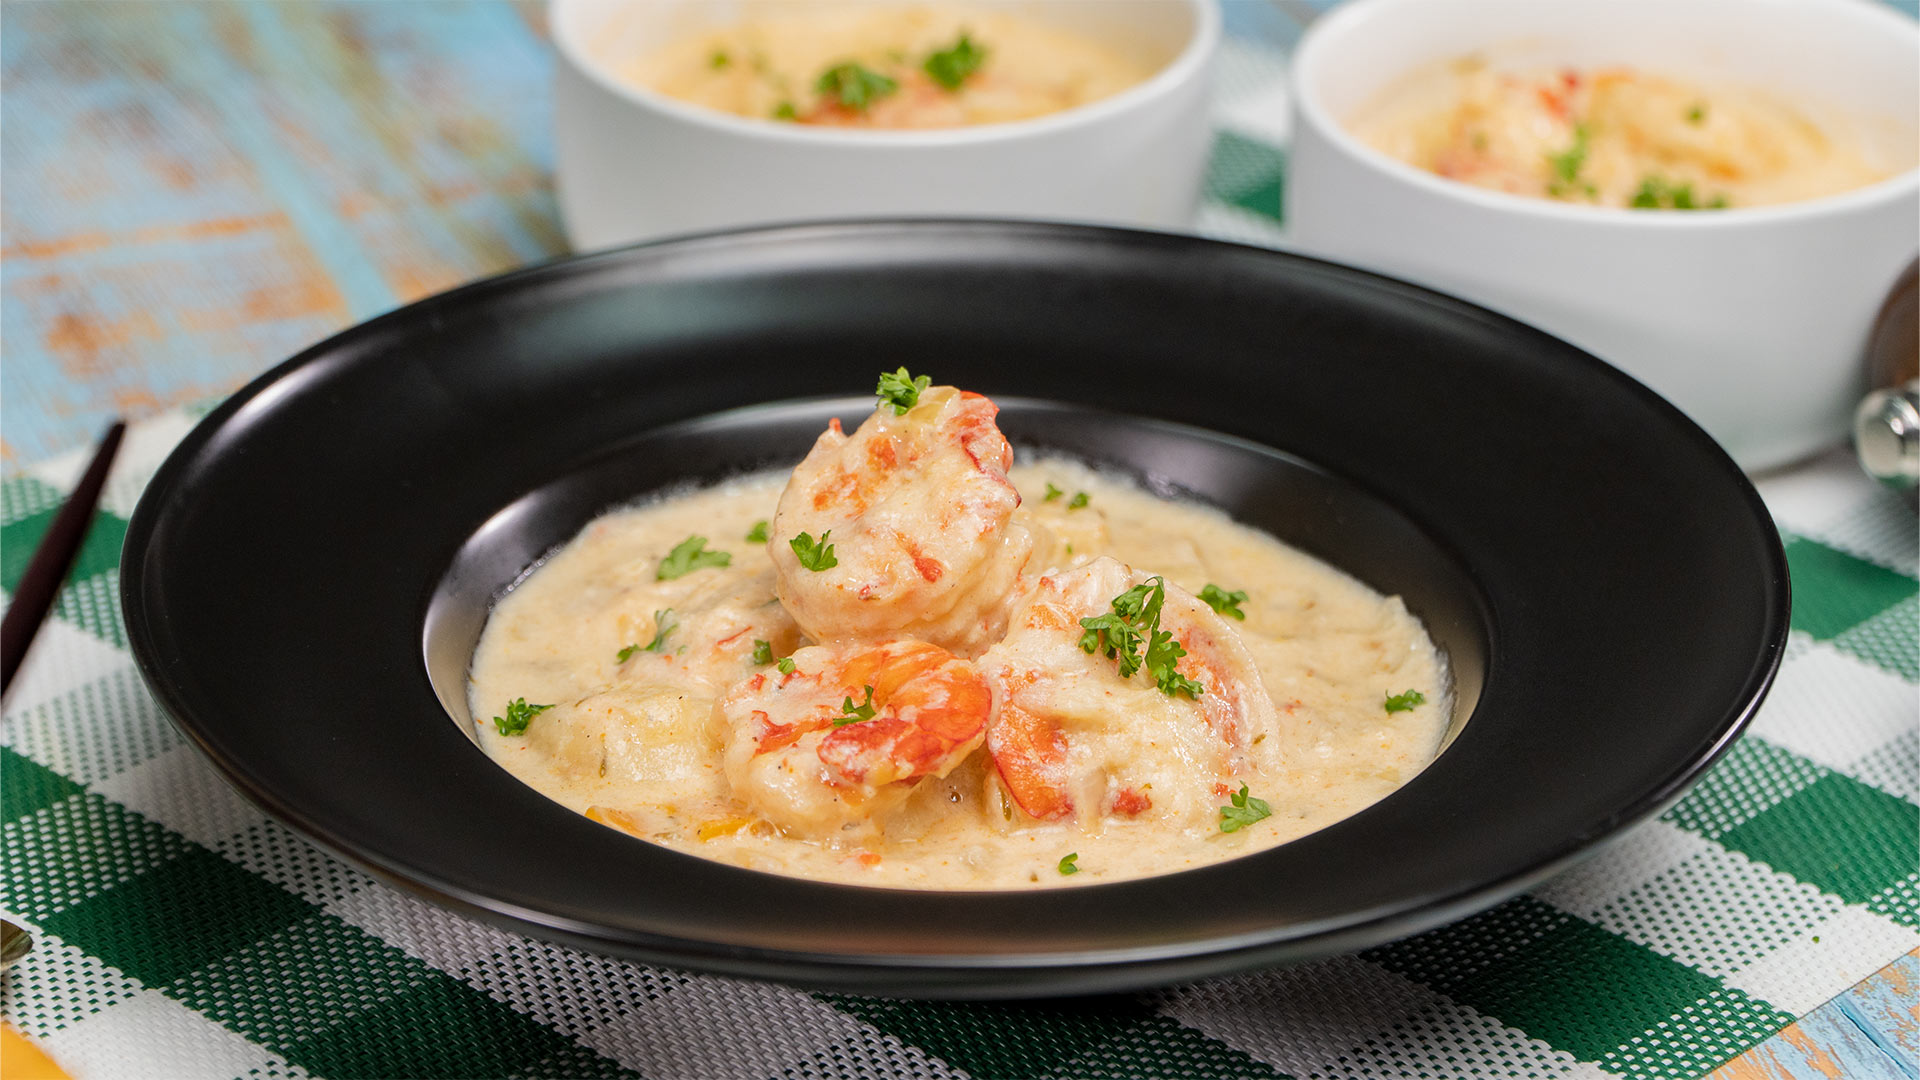 Creamy Leek Soup with seared shrimp - Life Currents